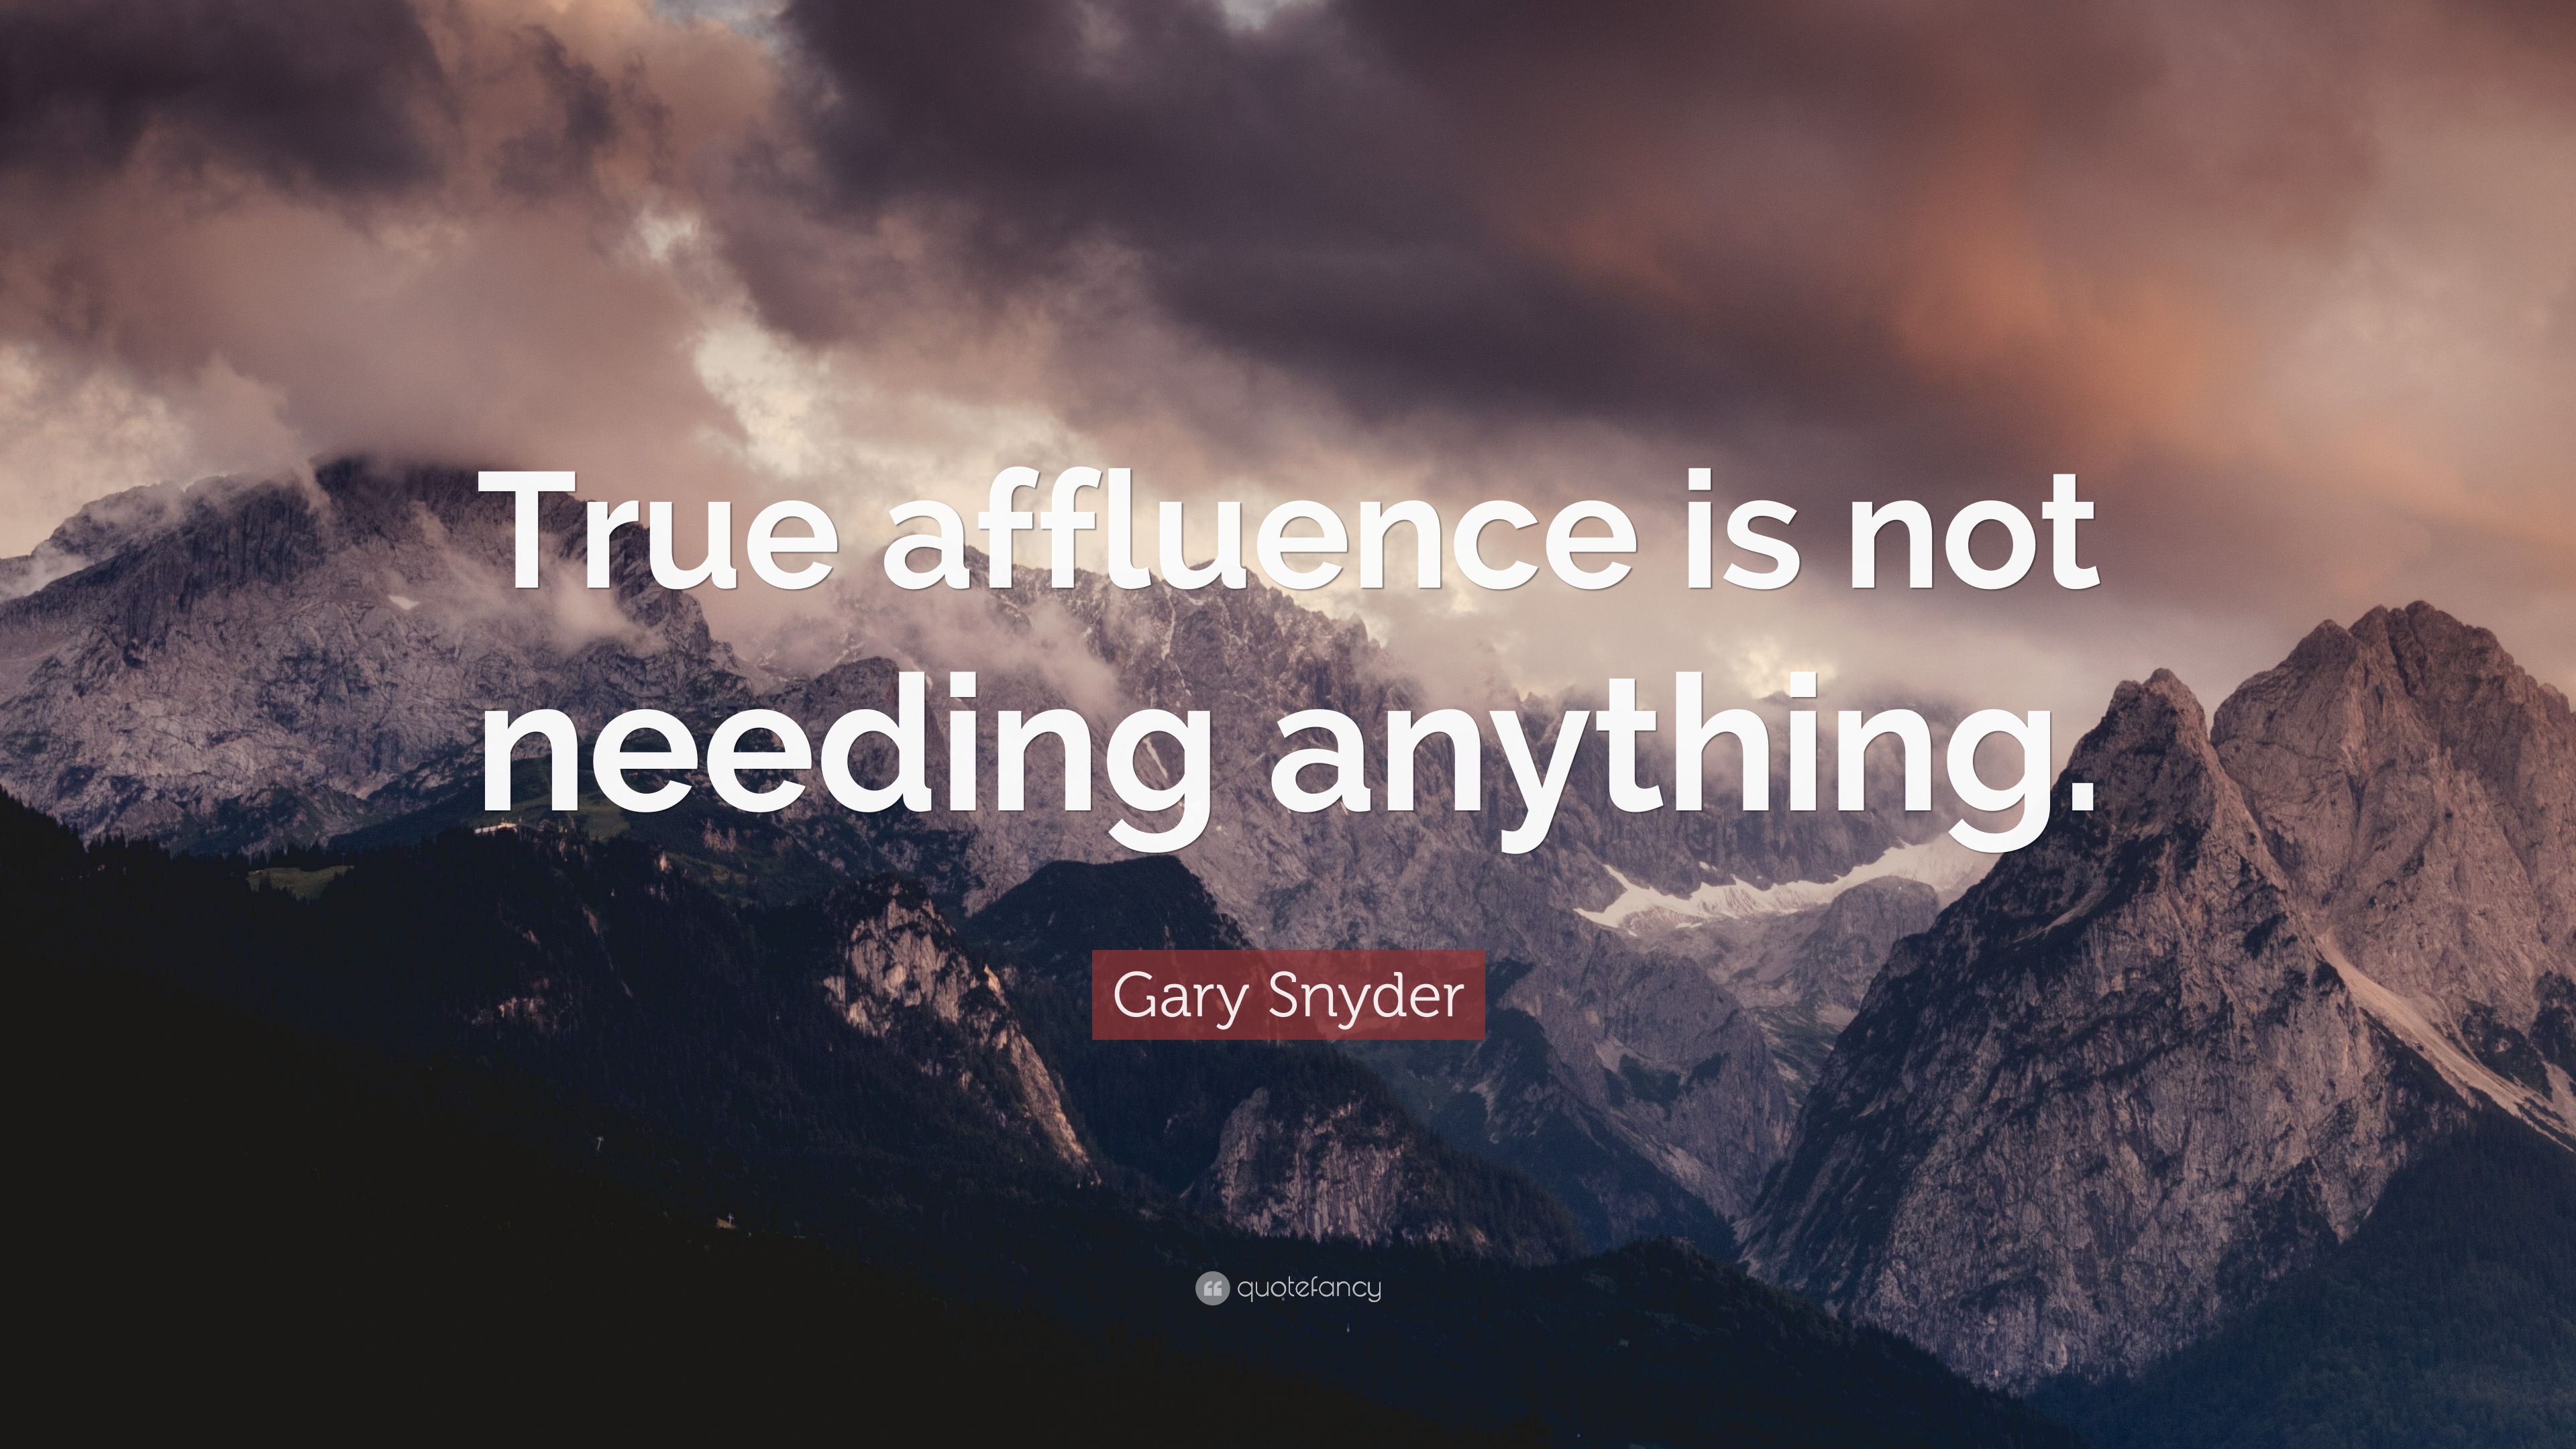 Gary Snyder Quote “True affluence is not needing anything.”